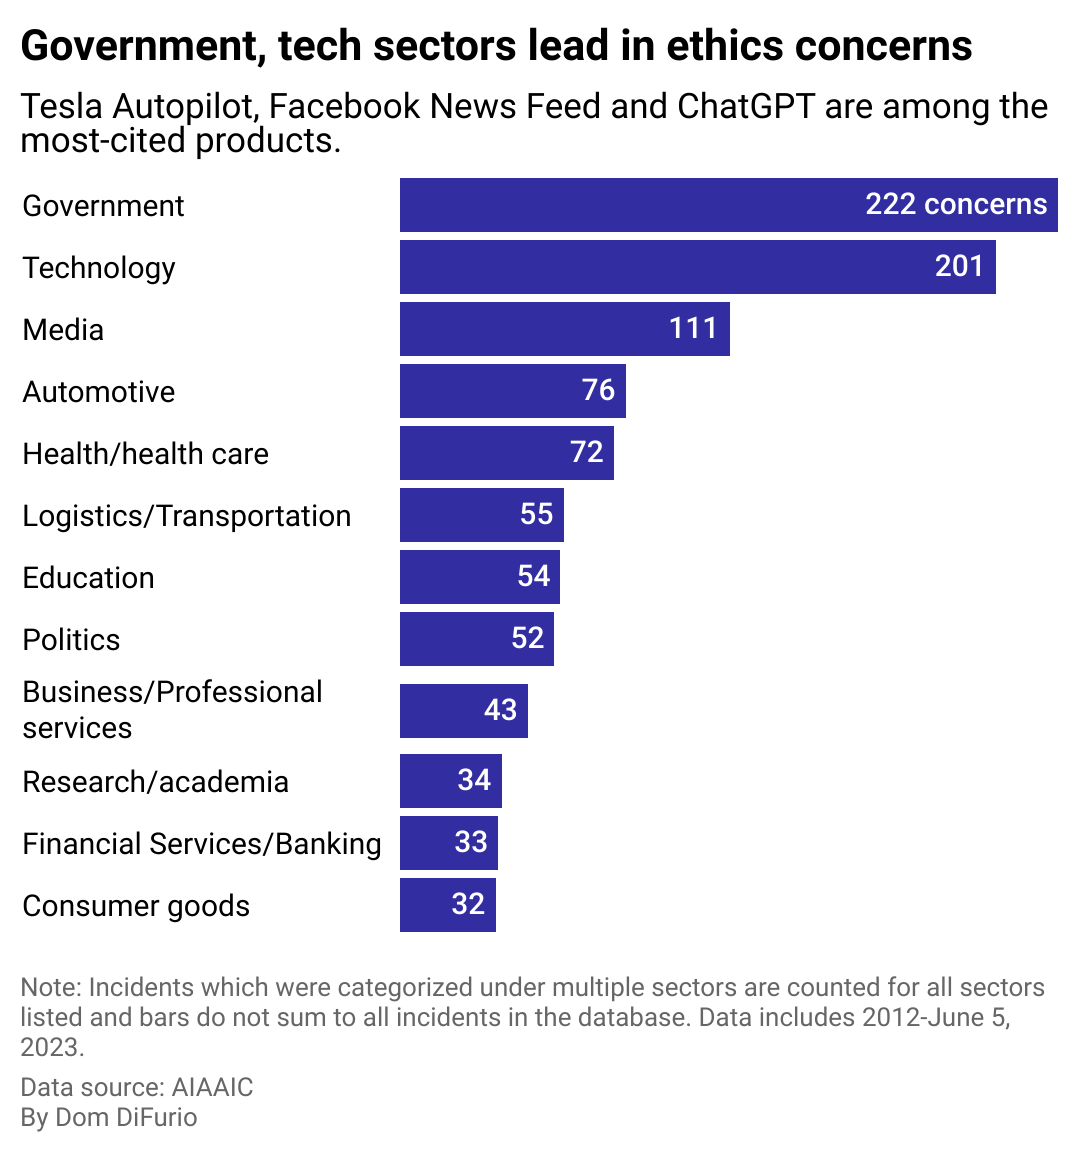 A chart showing government as having the most complaints concerning AI, according to data kept by the AIAAIC. Tech and media follow.